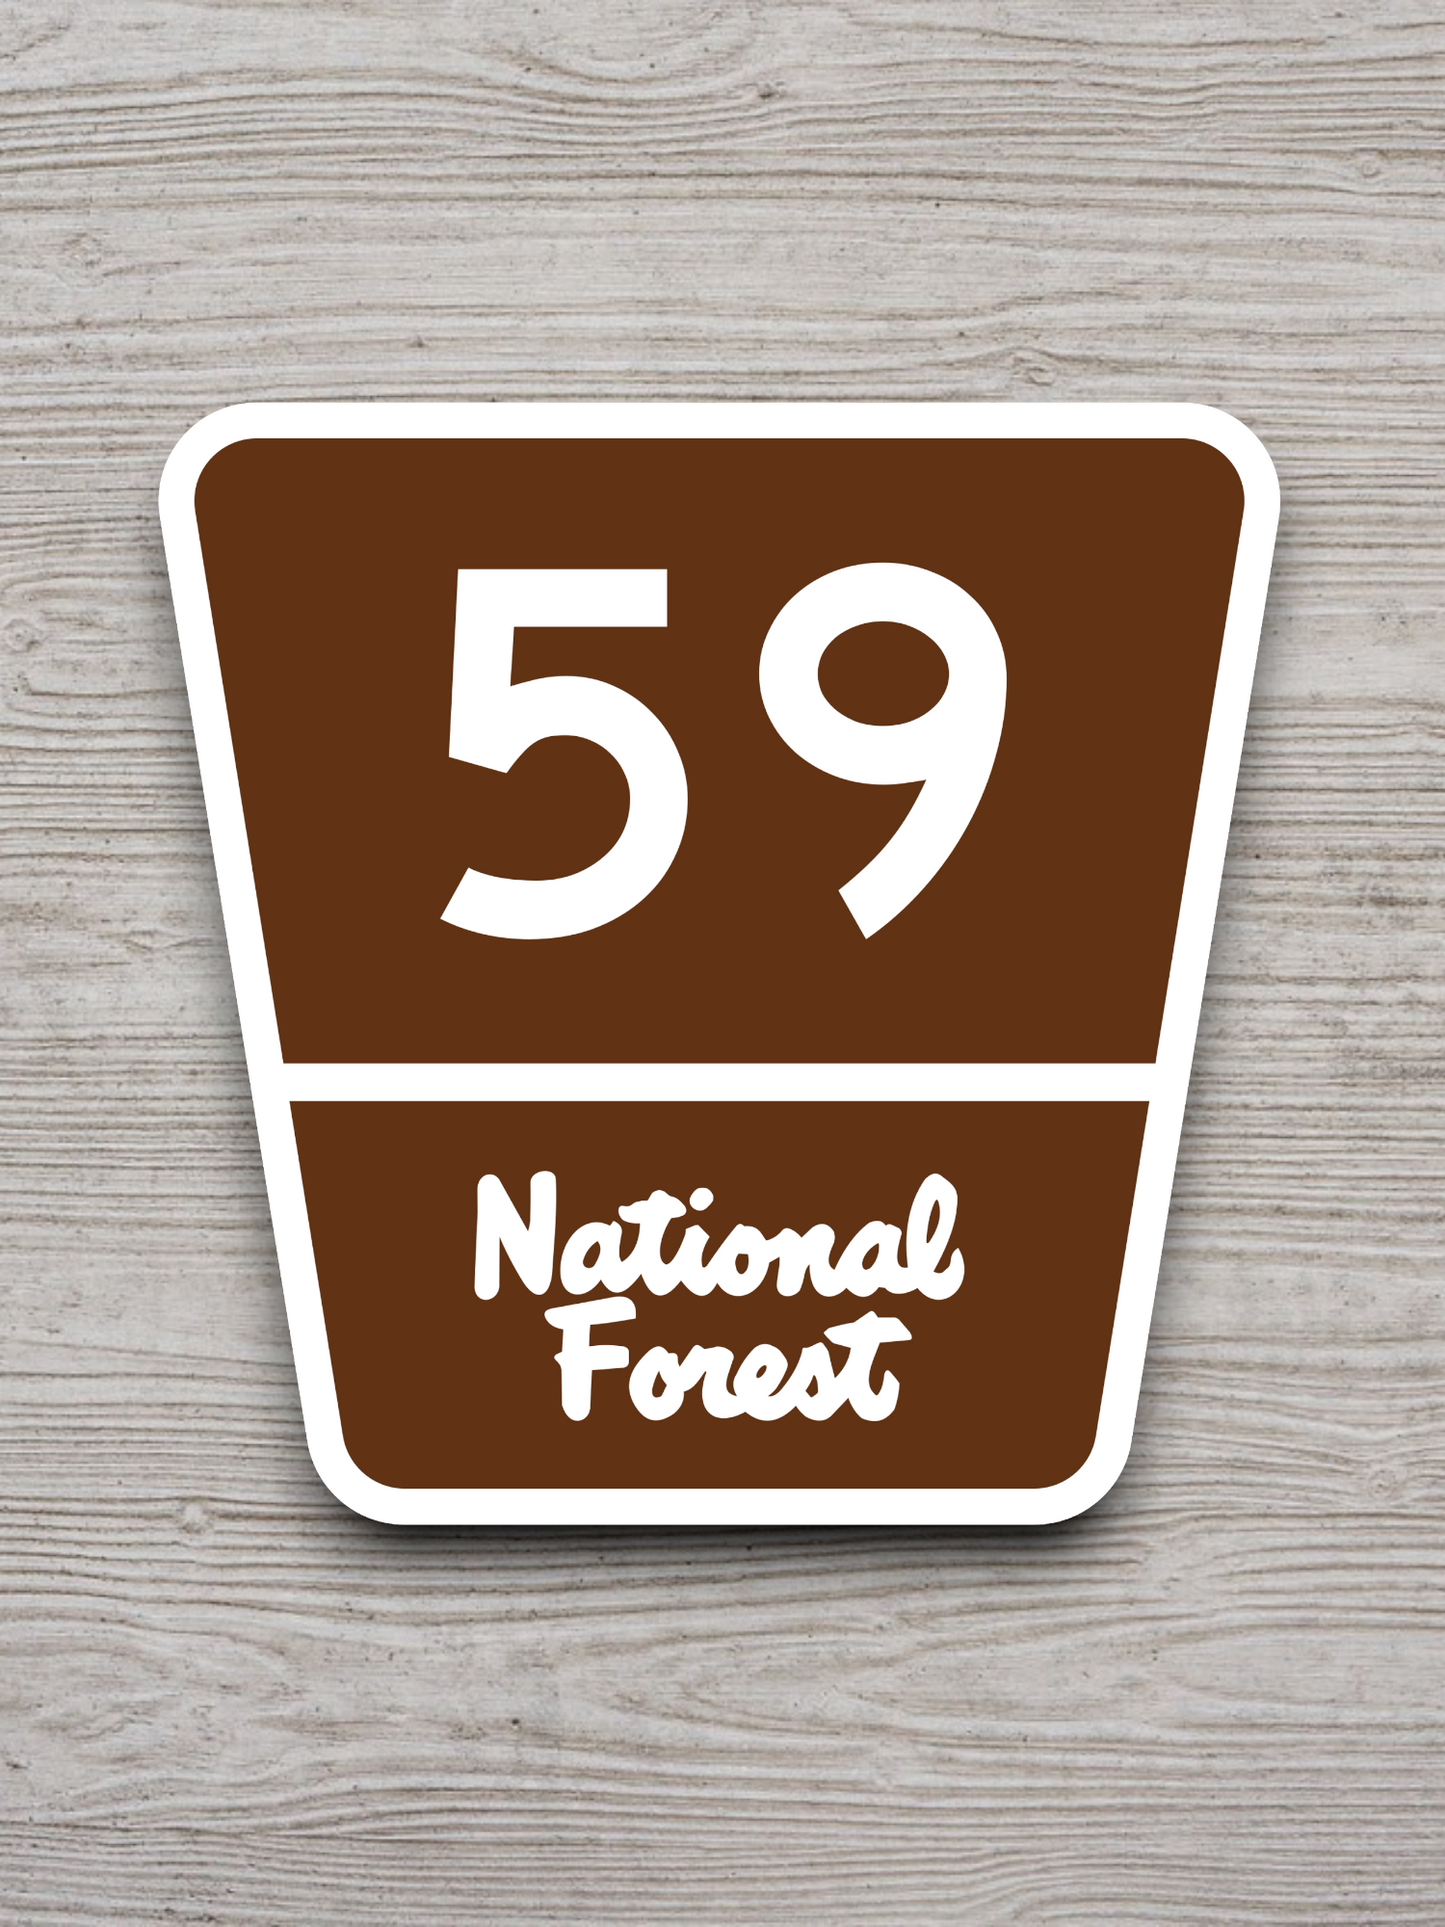 Forest Highway Route 59 Sticker